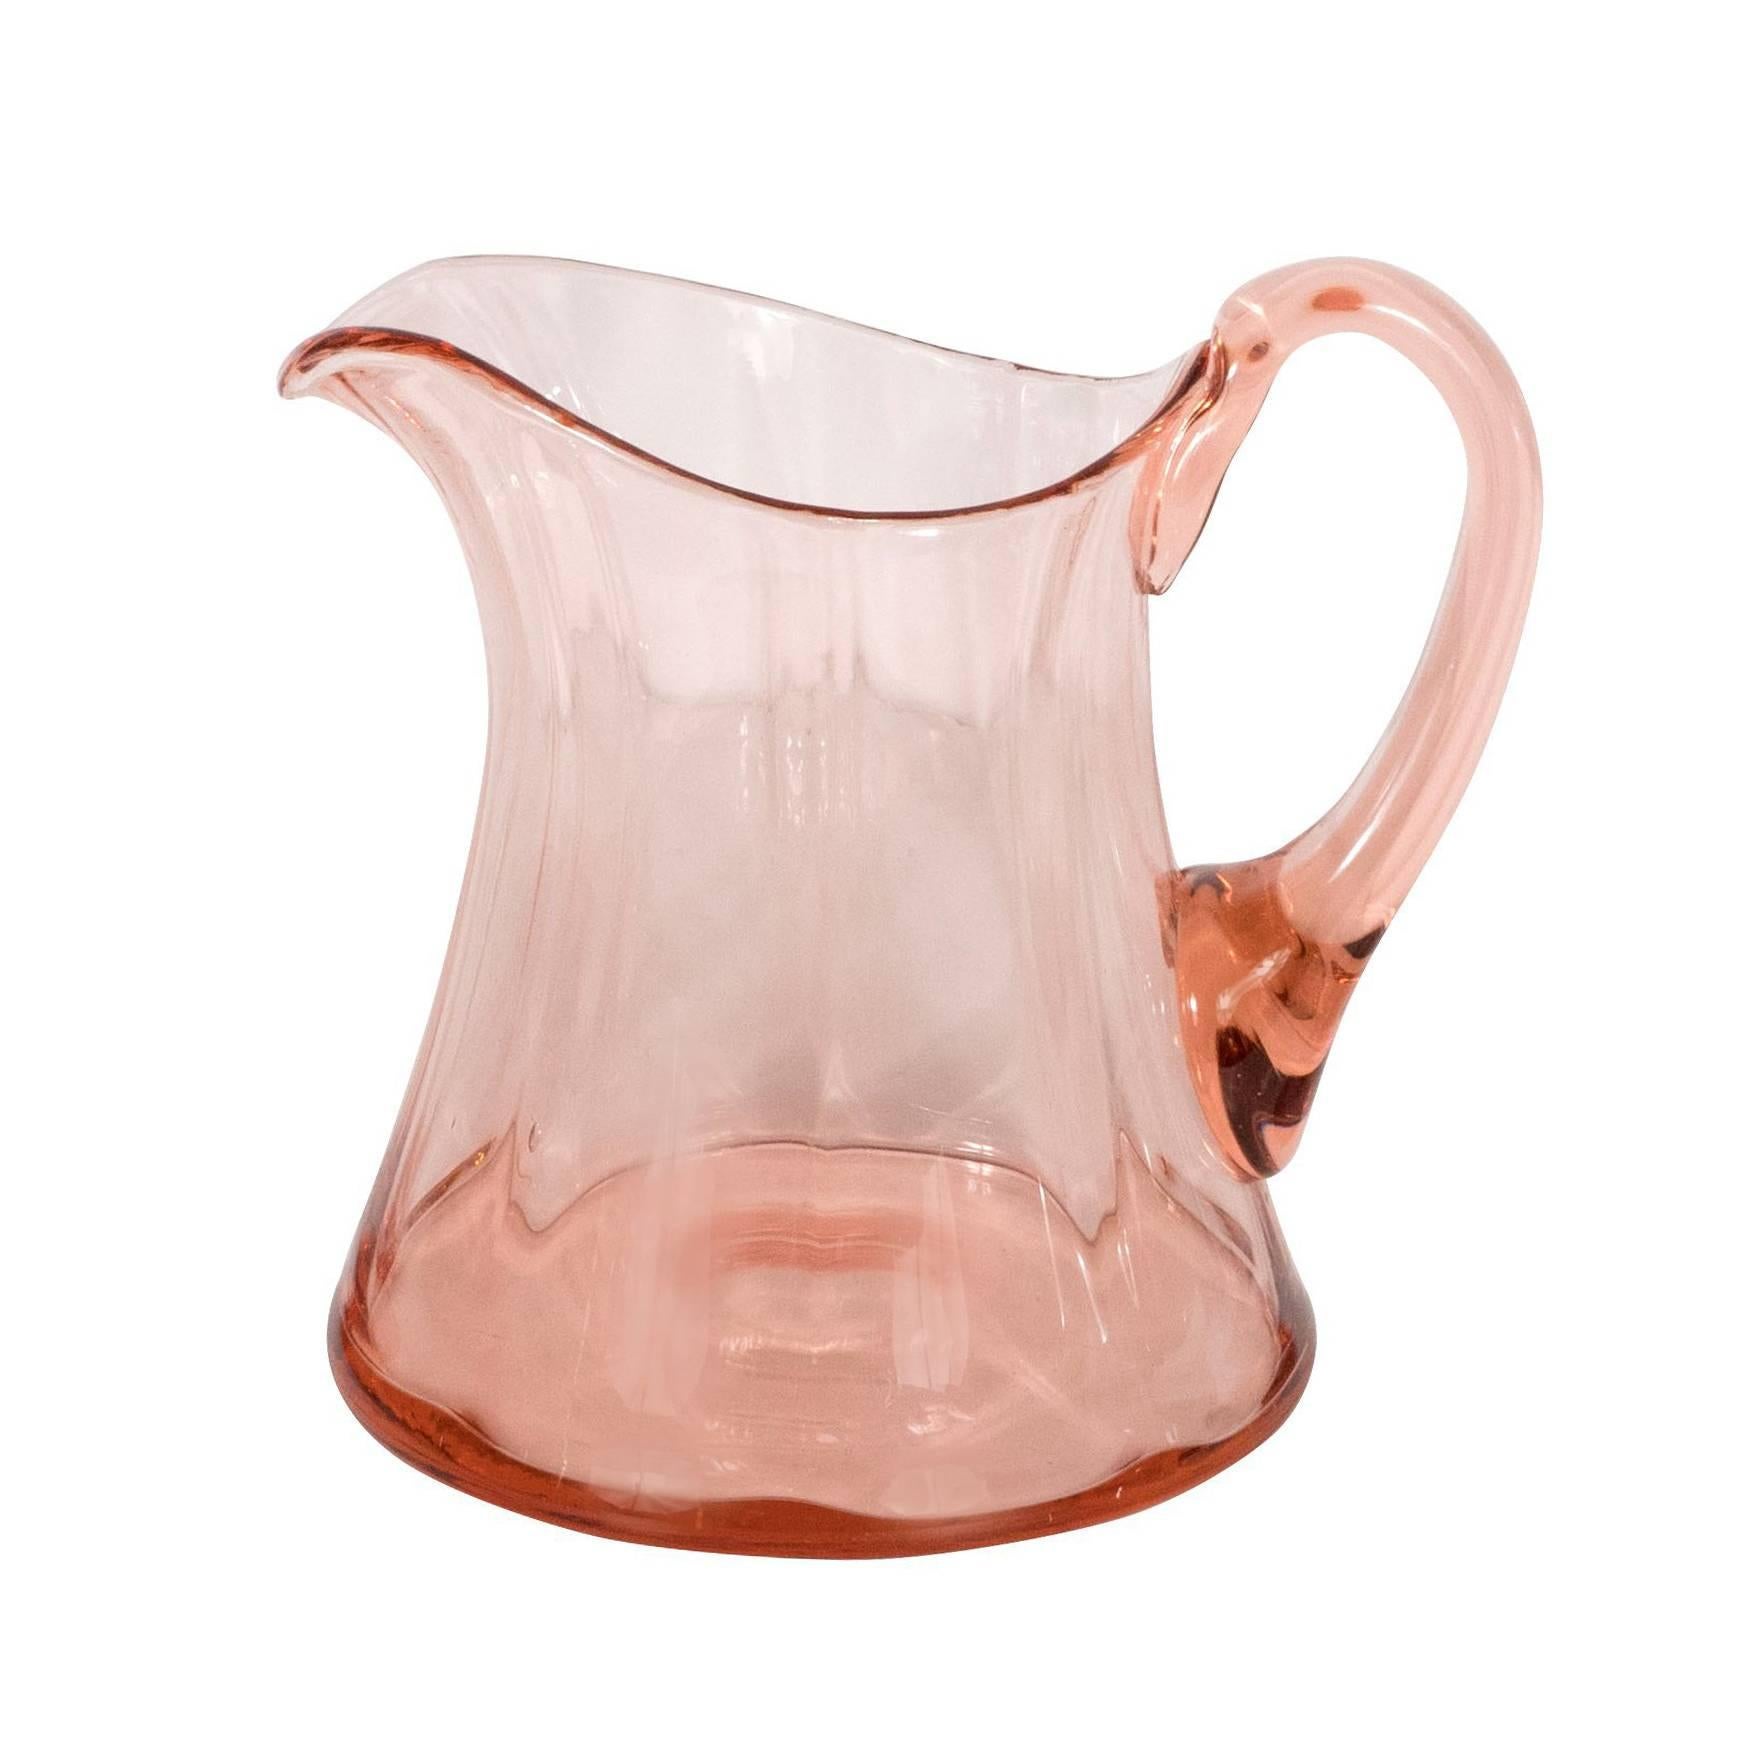 American Art Deco Channeled Rose Colored Pitcher